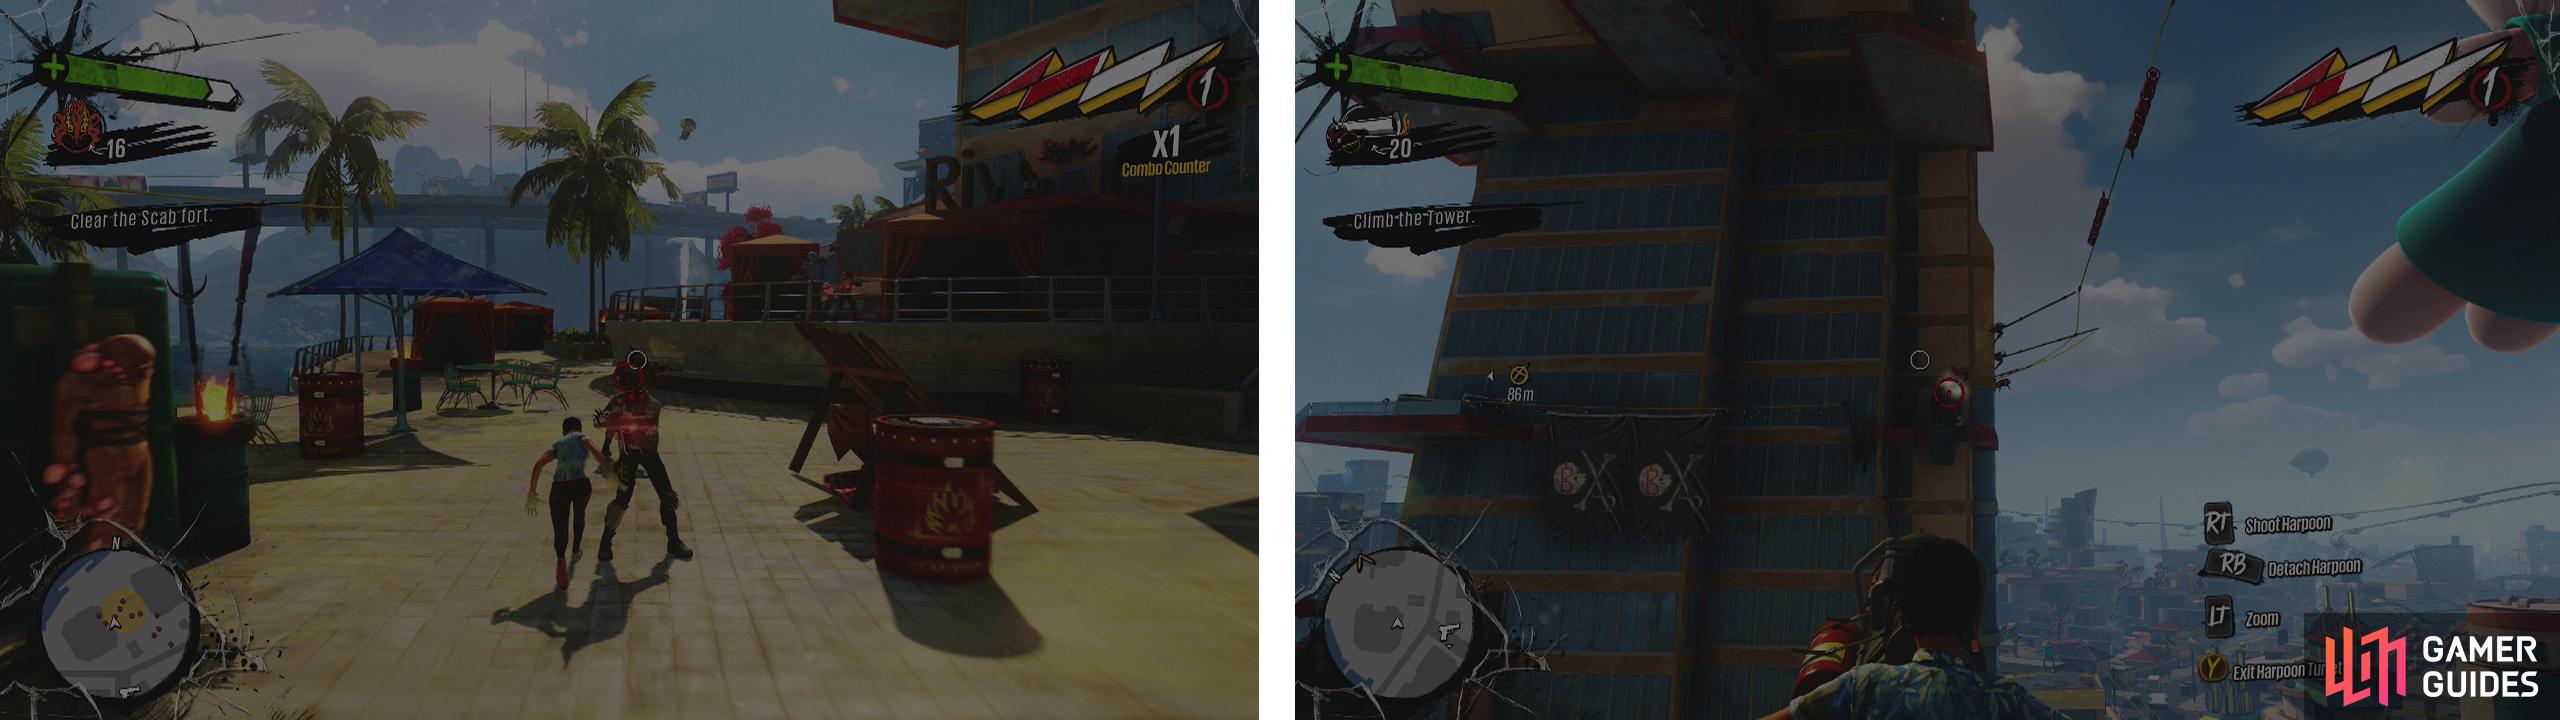 Clear the base of the towers of Scabs (left) and then use the harpoon guns to start climbing (right).